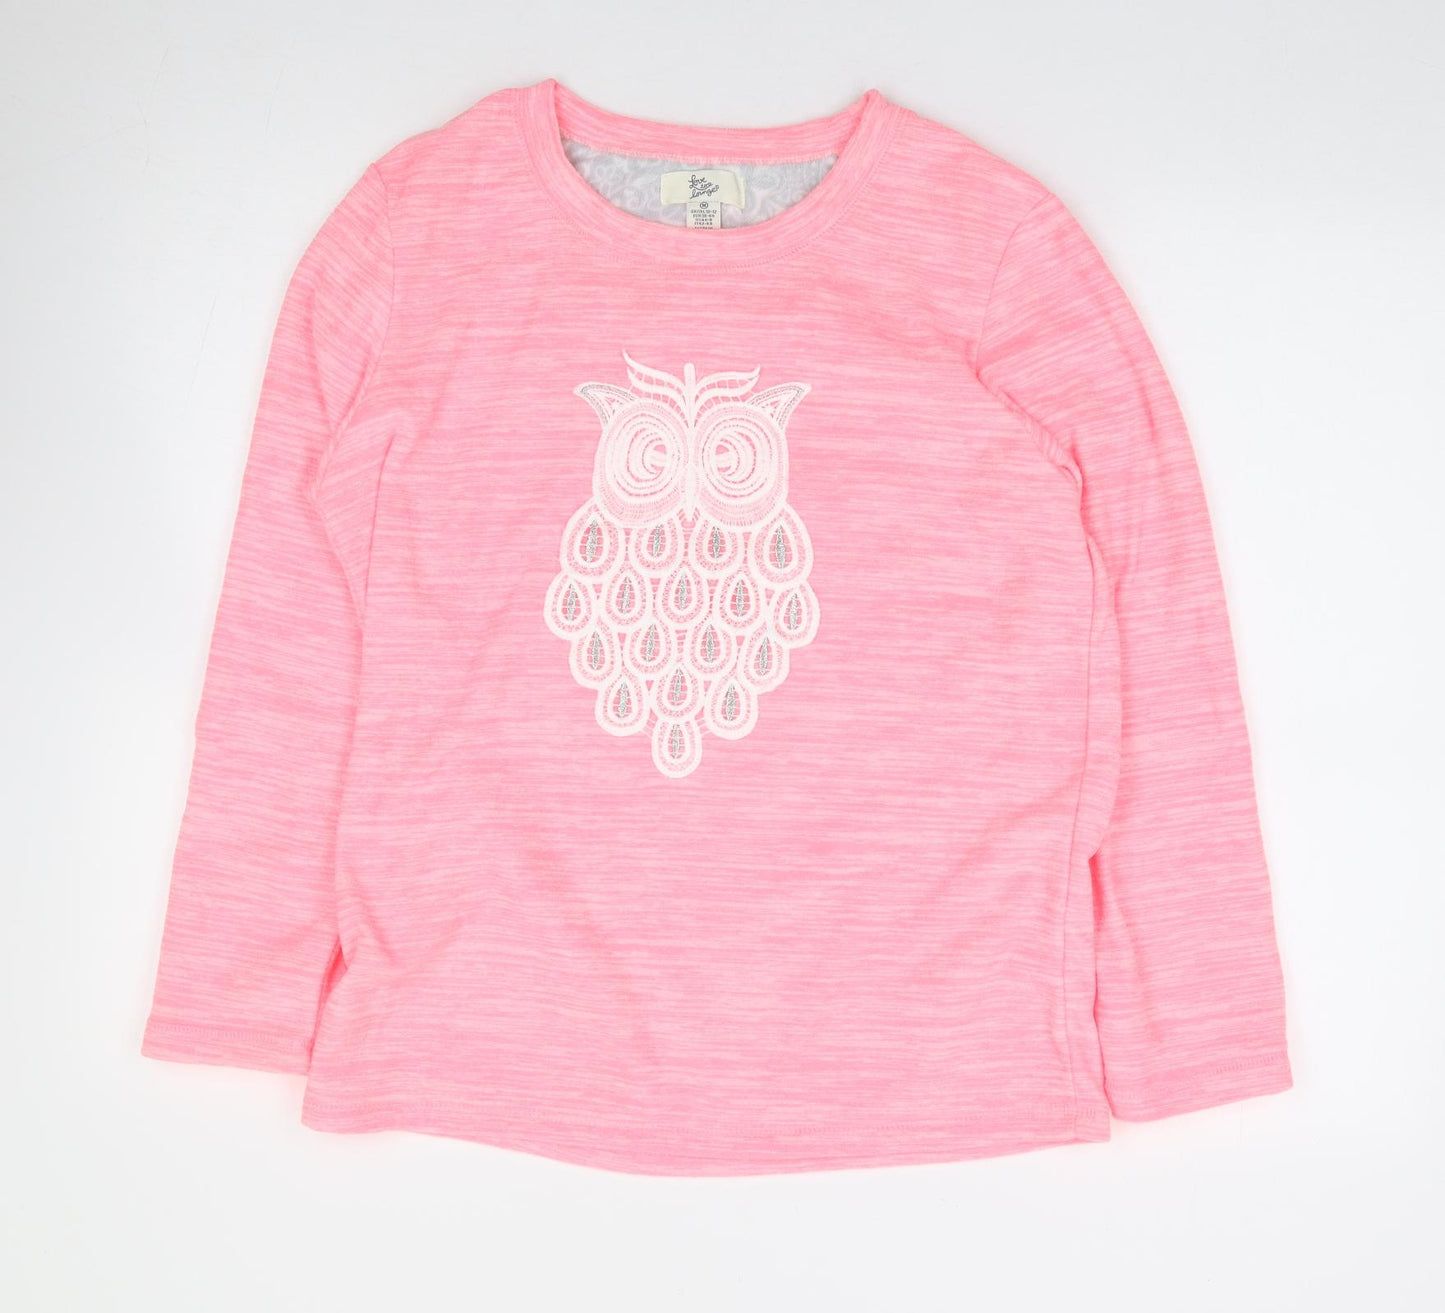 Primark Womens Pink Solid Polyester Top Pyjama Top Size M   - Owl